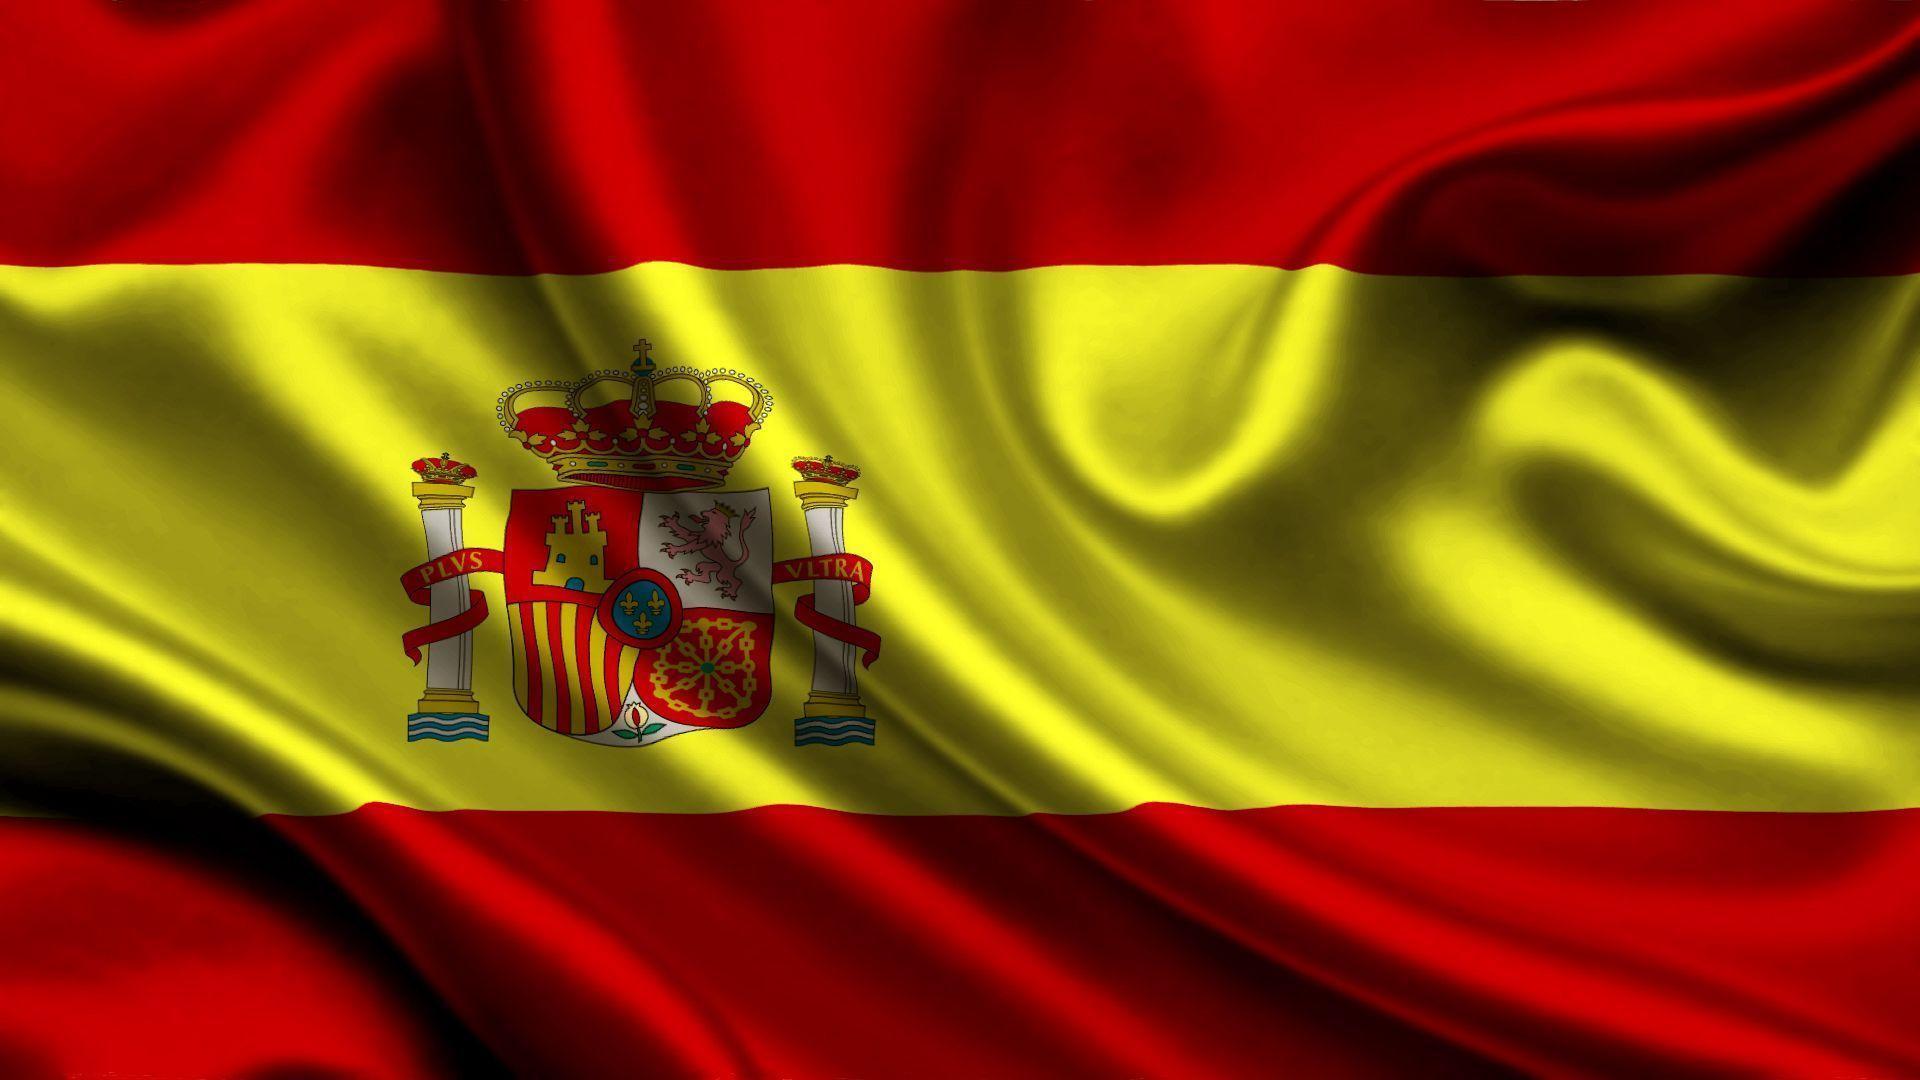 spain download wallpaper on spanish wallpapers